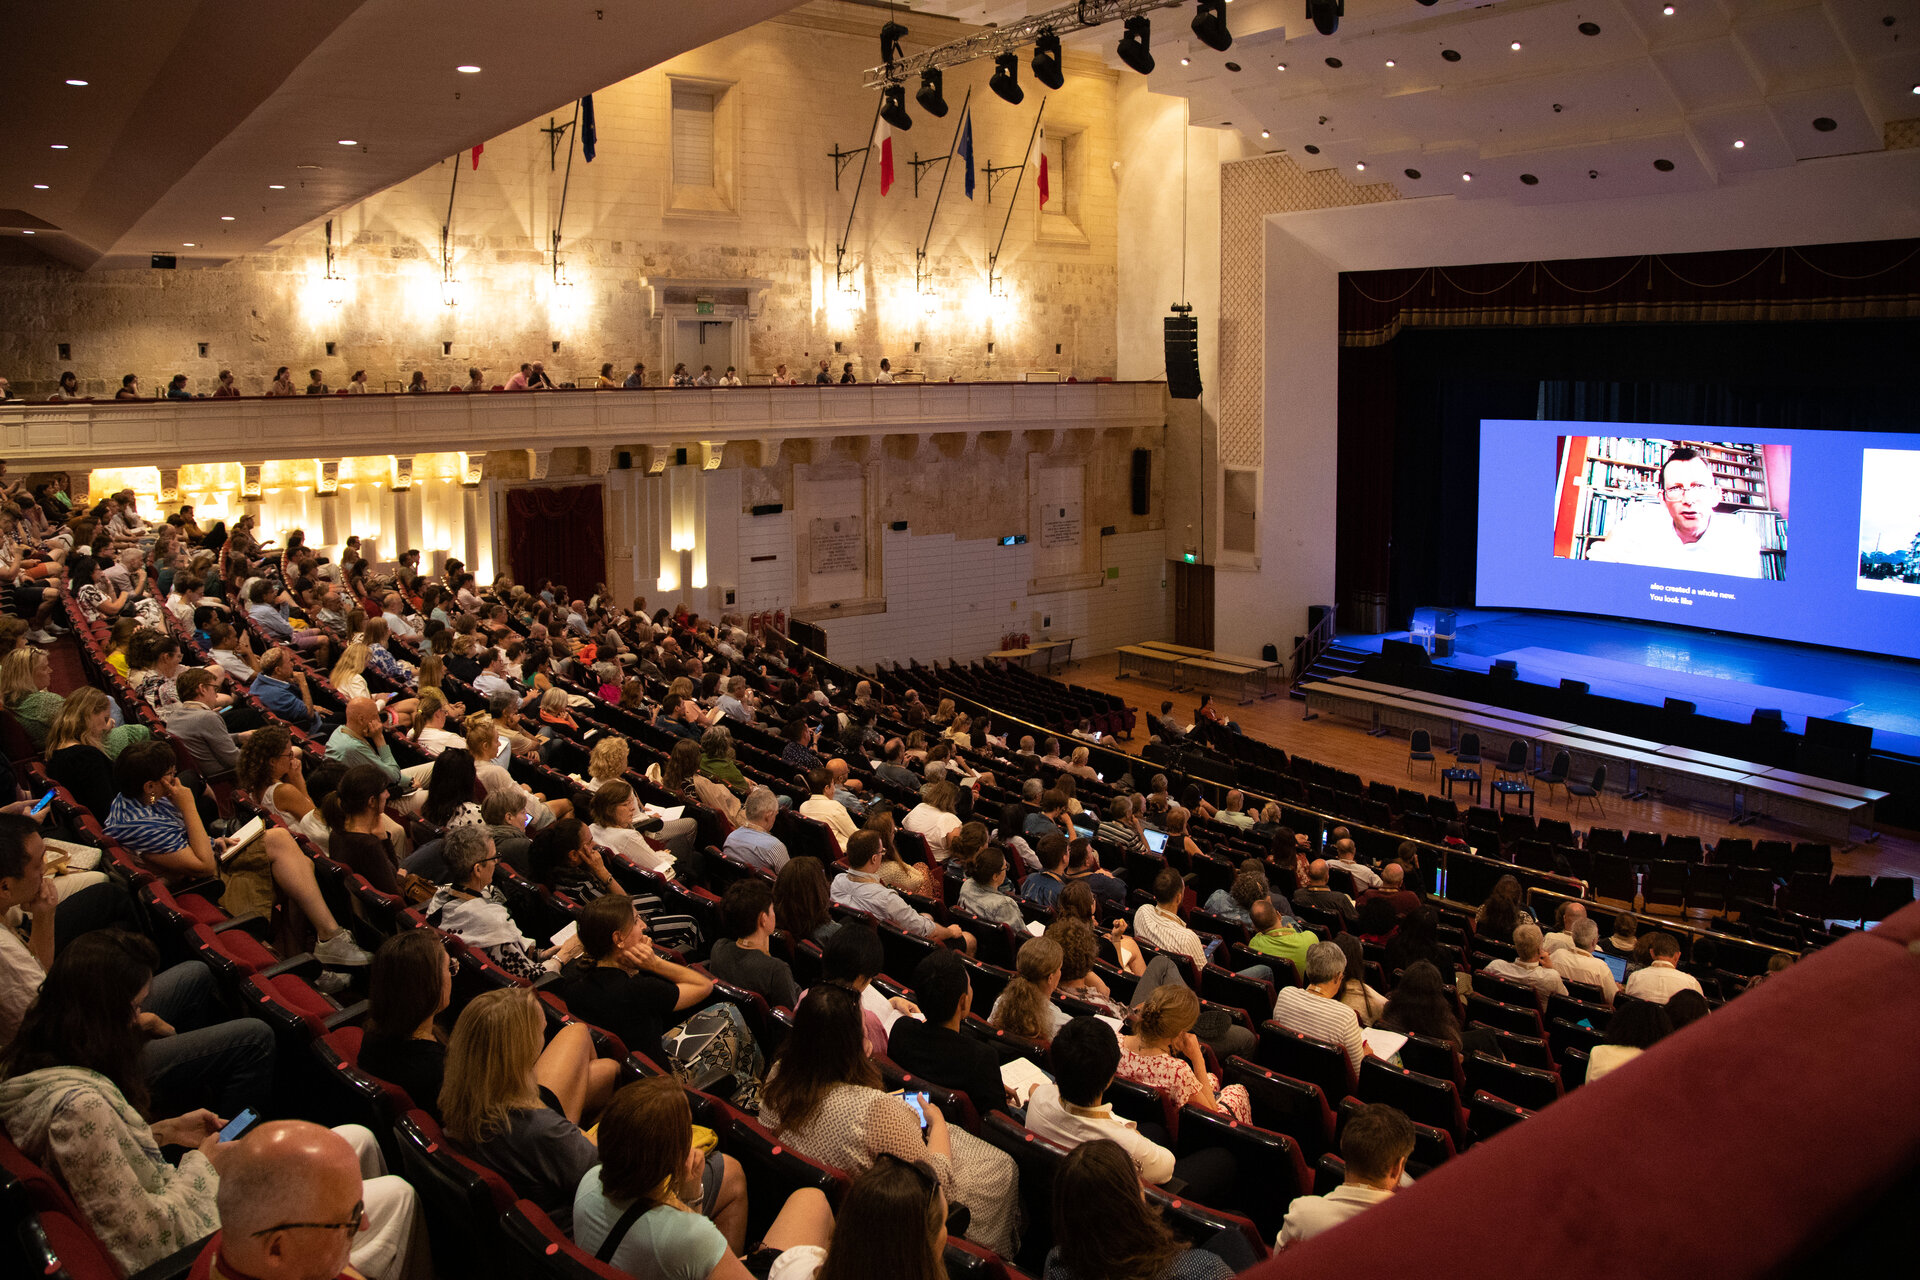 The 2023 edition of the Ecsite Conference took place from 15 to 17 June in Malta and saw the participation of 850 attendees and 350 expert speakers from over 50 countries.